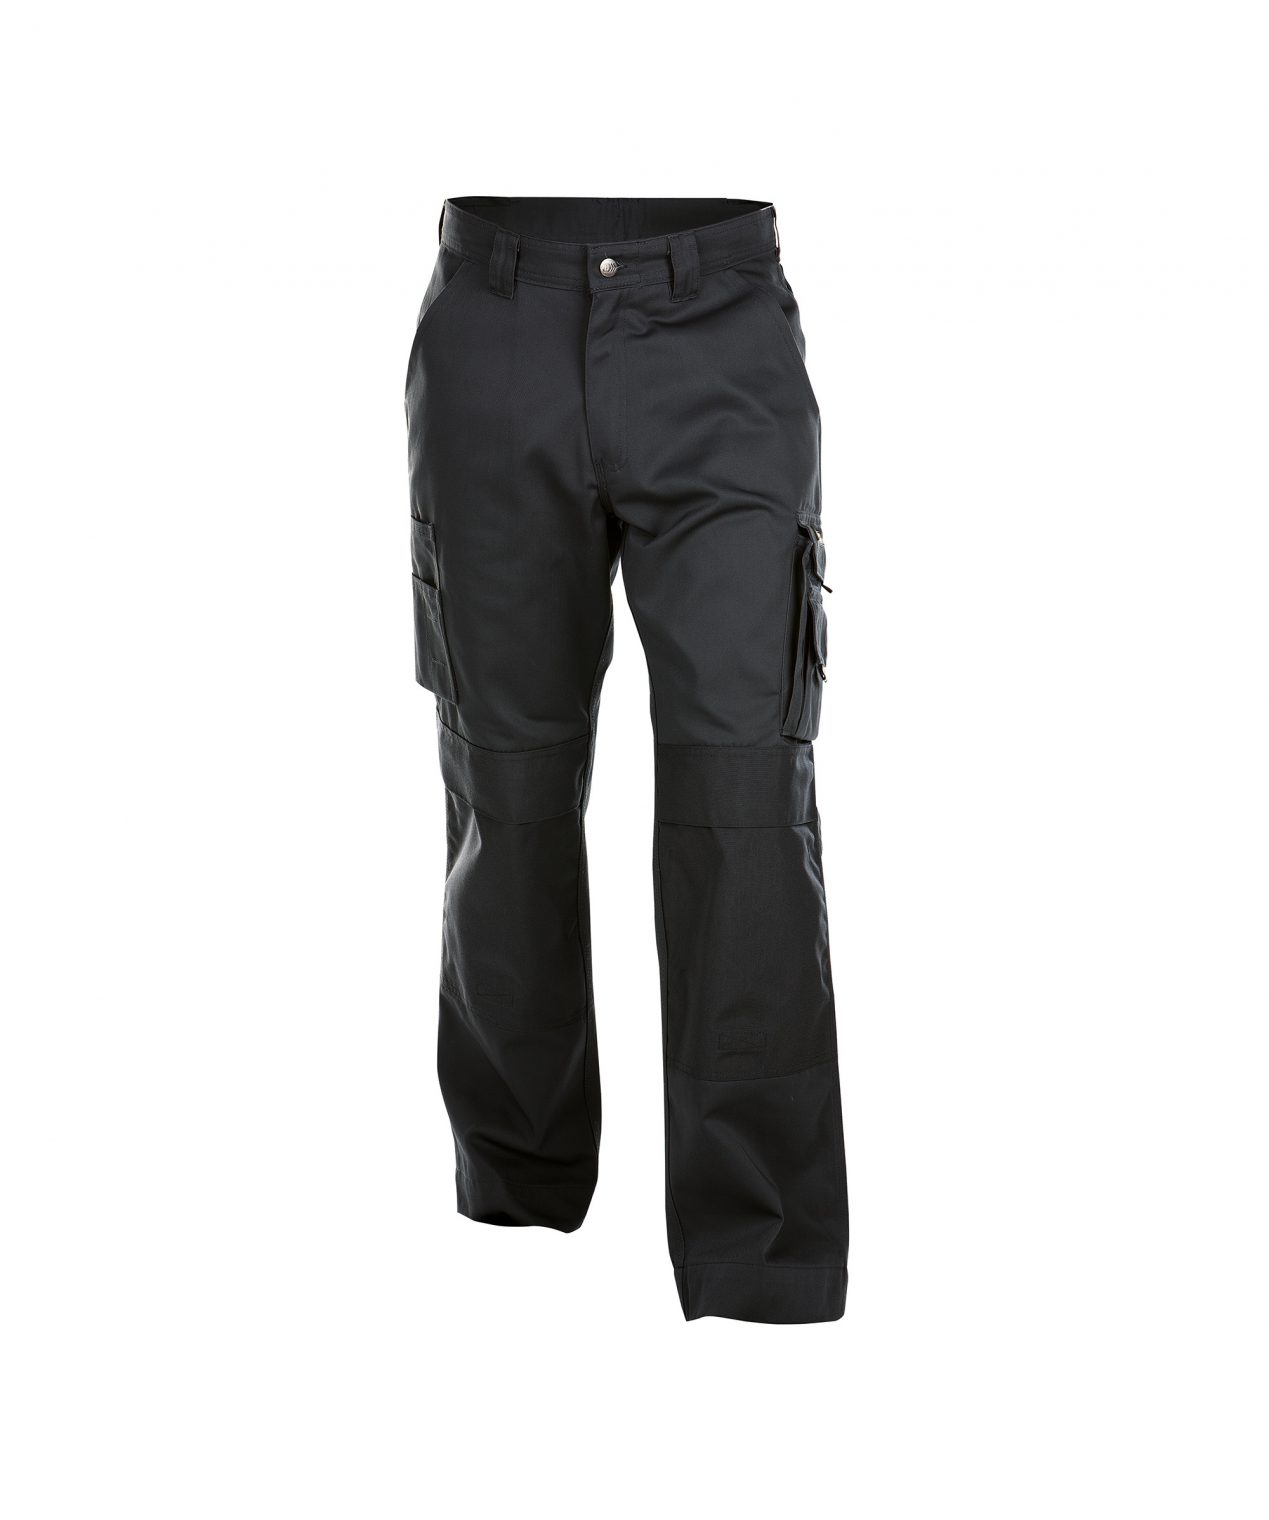 miami work trousers with knee pockets black front